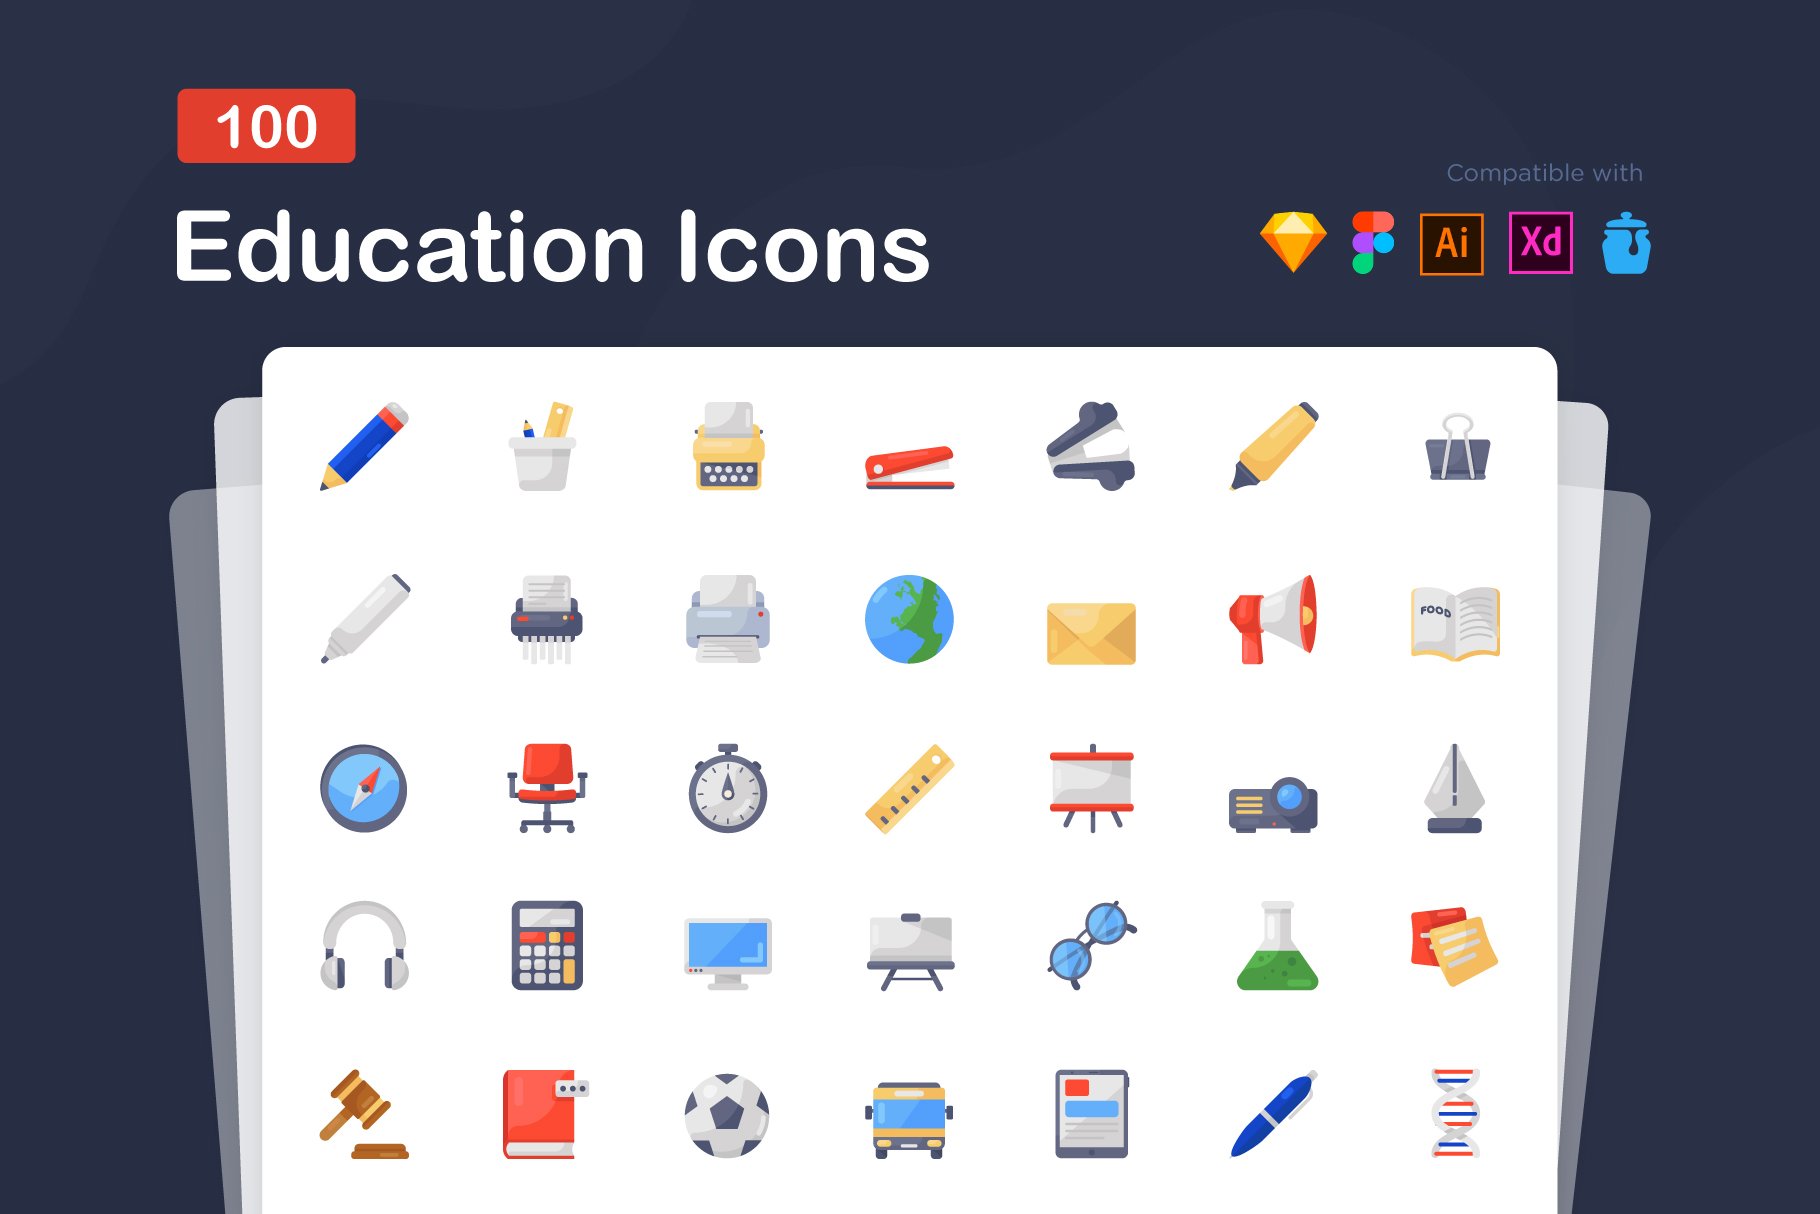 Education Icons in Flat Style cover image.